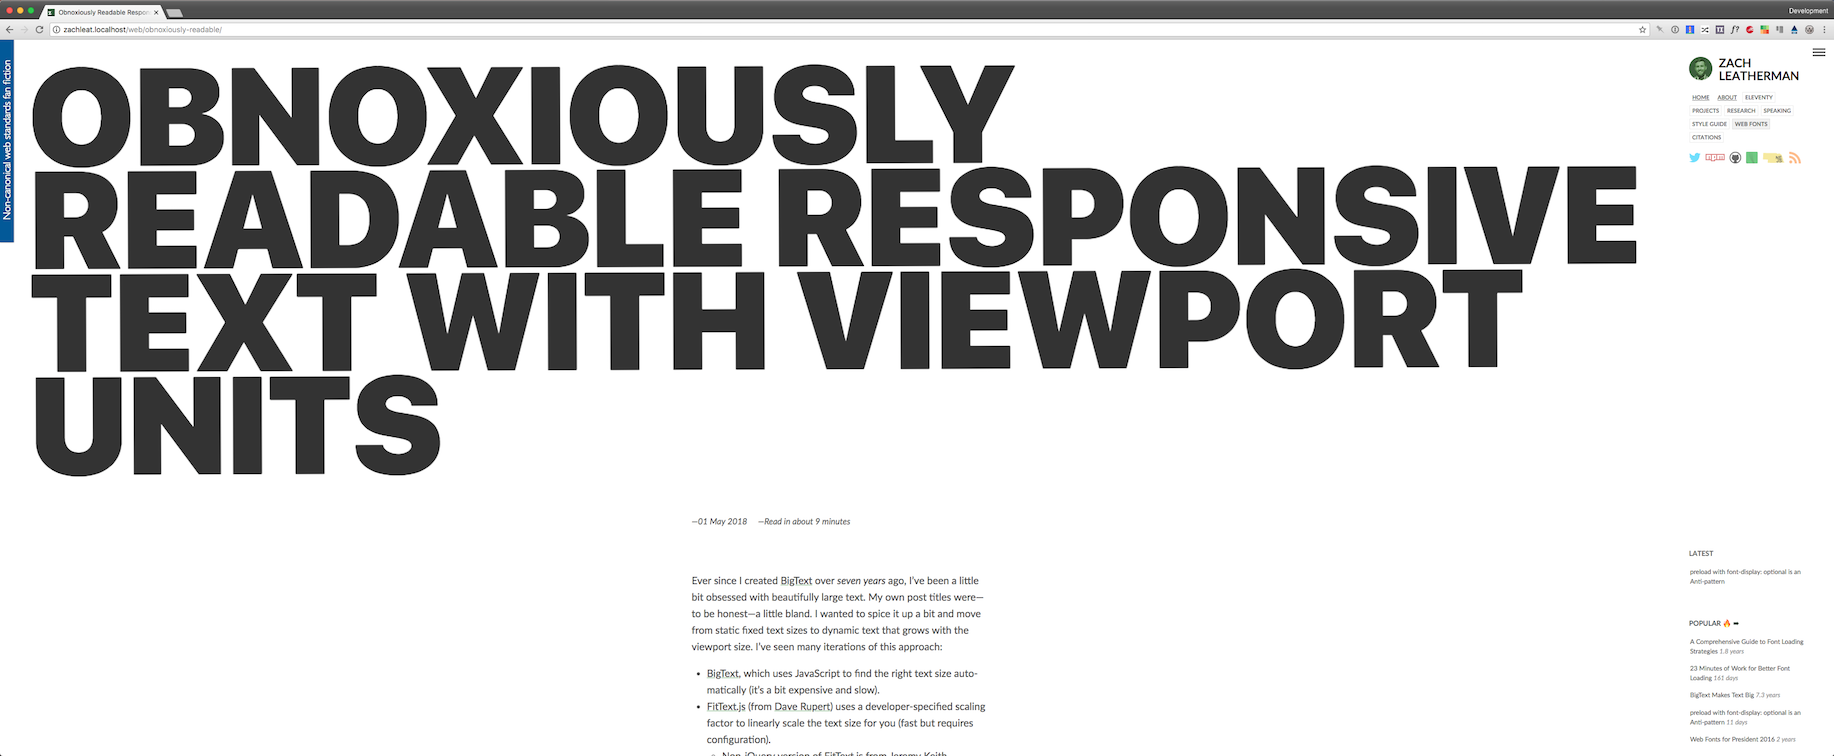 Giant Viewport Preview of the Blog Post Title